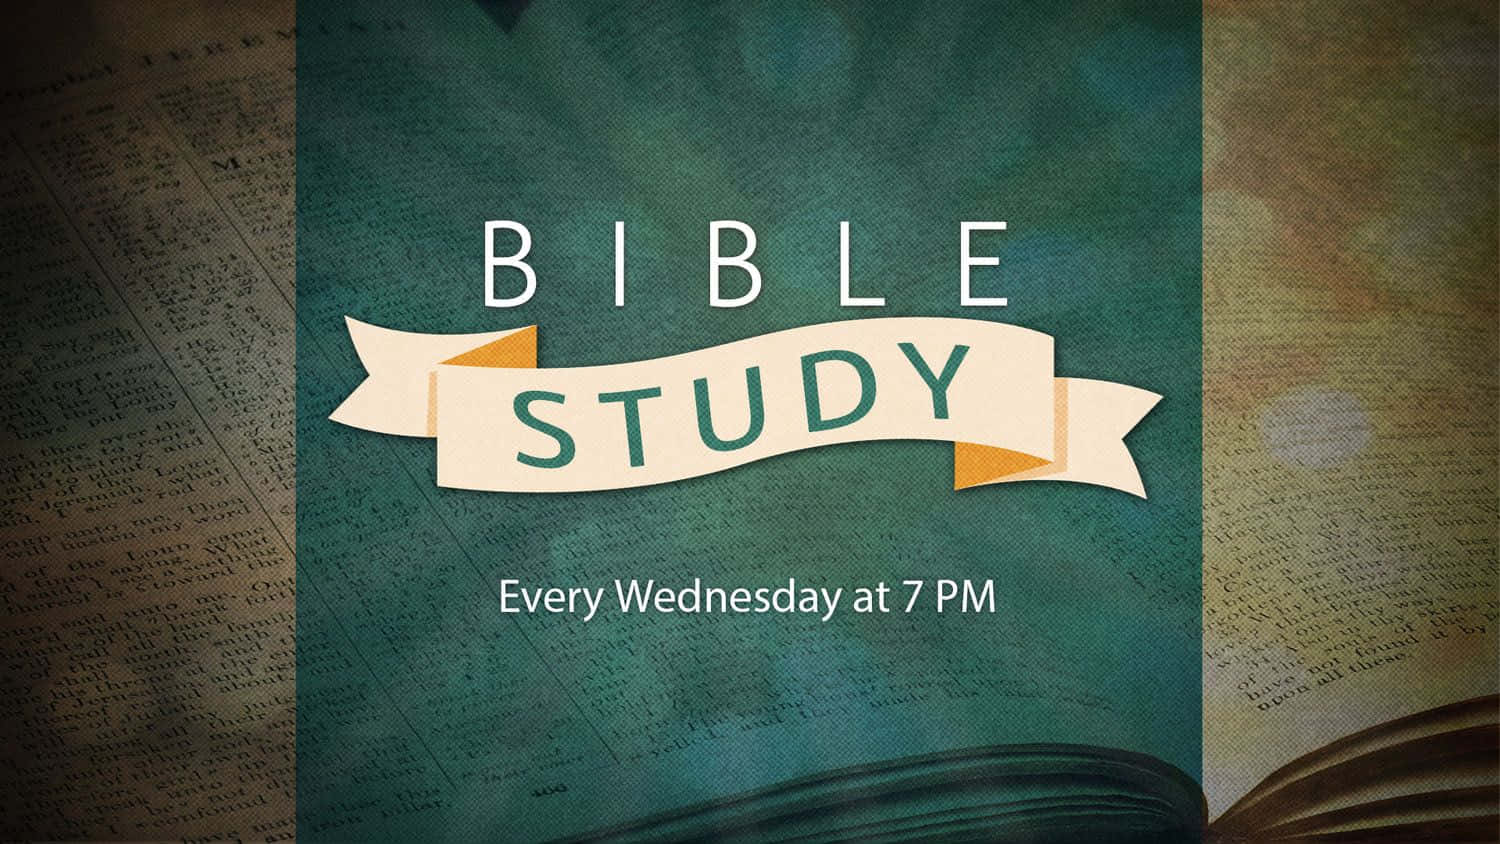 Group Bible Study Session Wallpaper